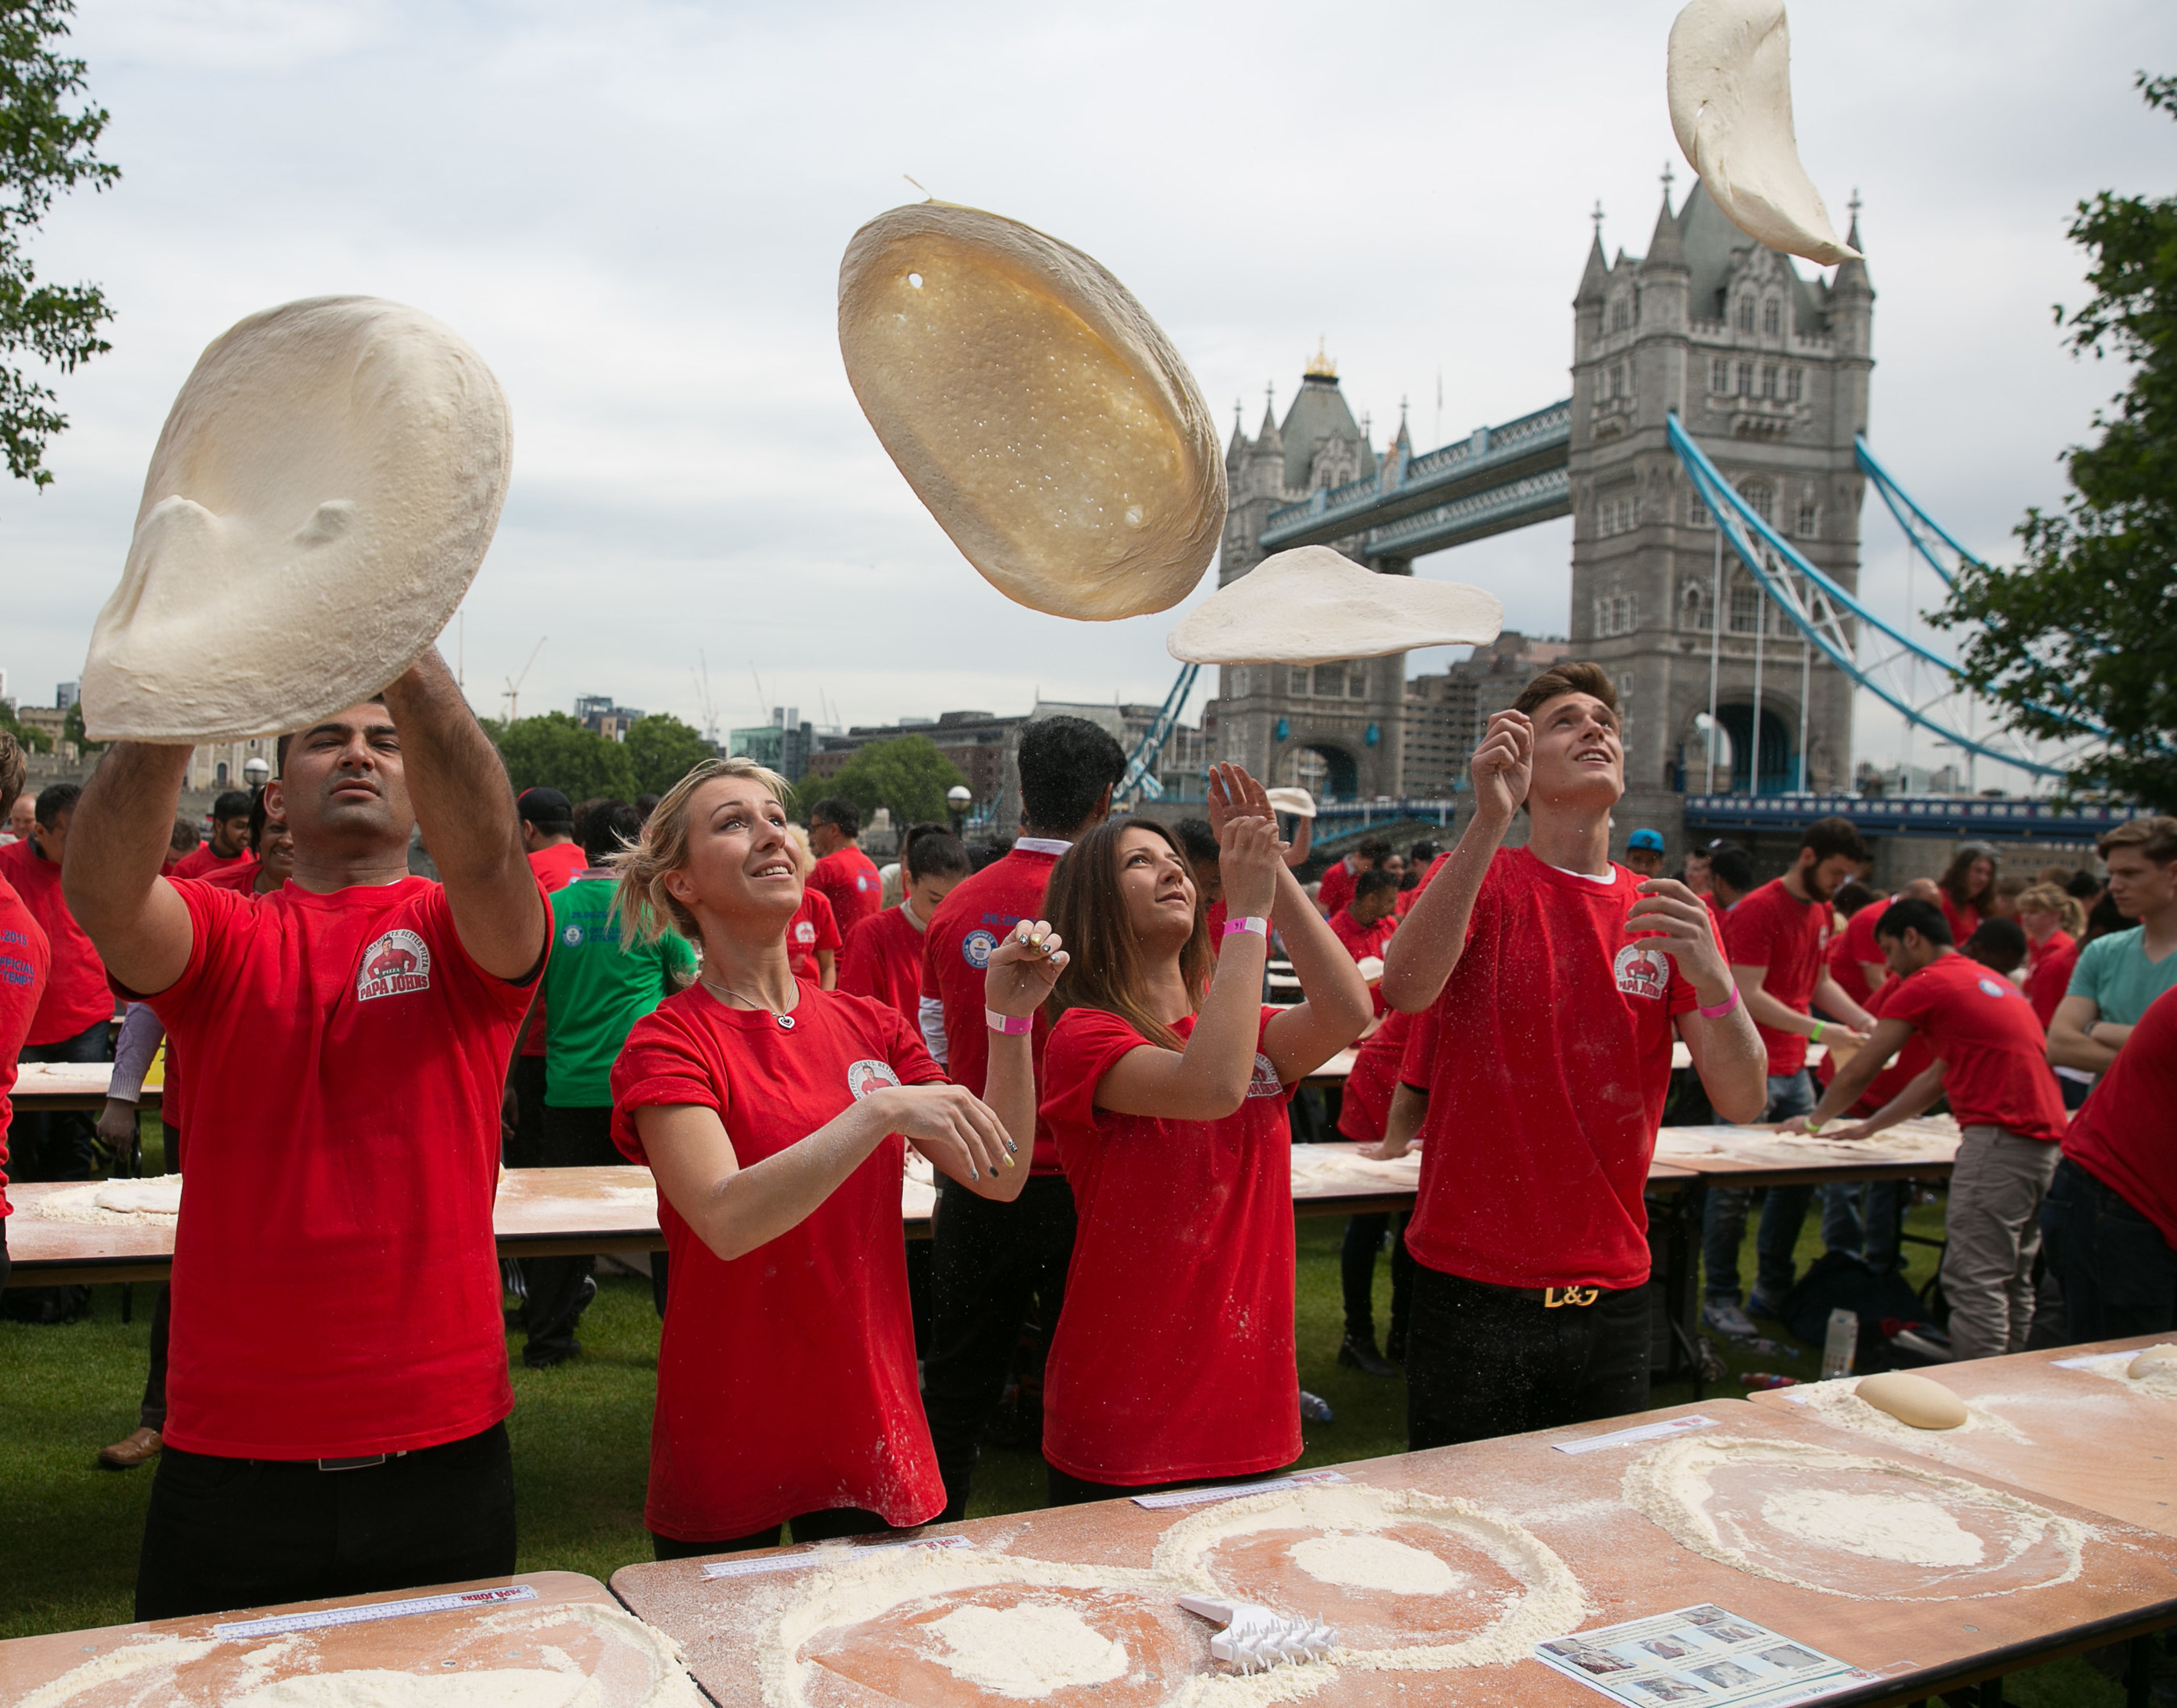 Papa John's employees get stuck in tossing pizza dough as they officially break the GUINNESS WORLD RECORD for the most number of people tossing pizza dough at once. (PRNewsFoto/Papa John's) (PRNewsFoto/Papa John's)